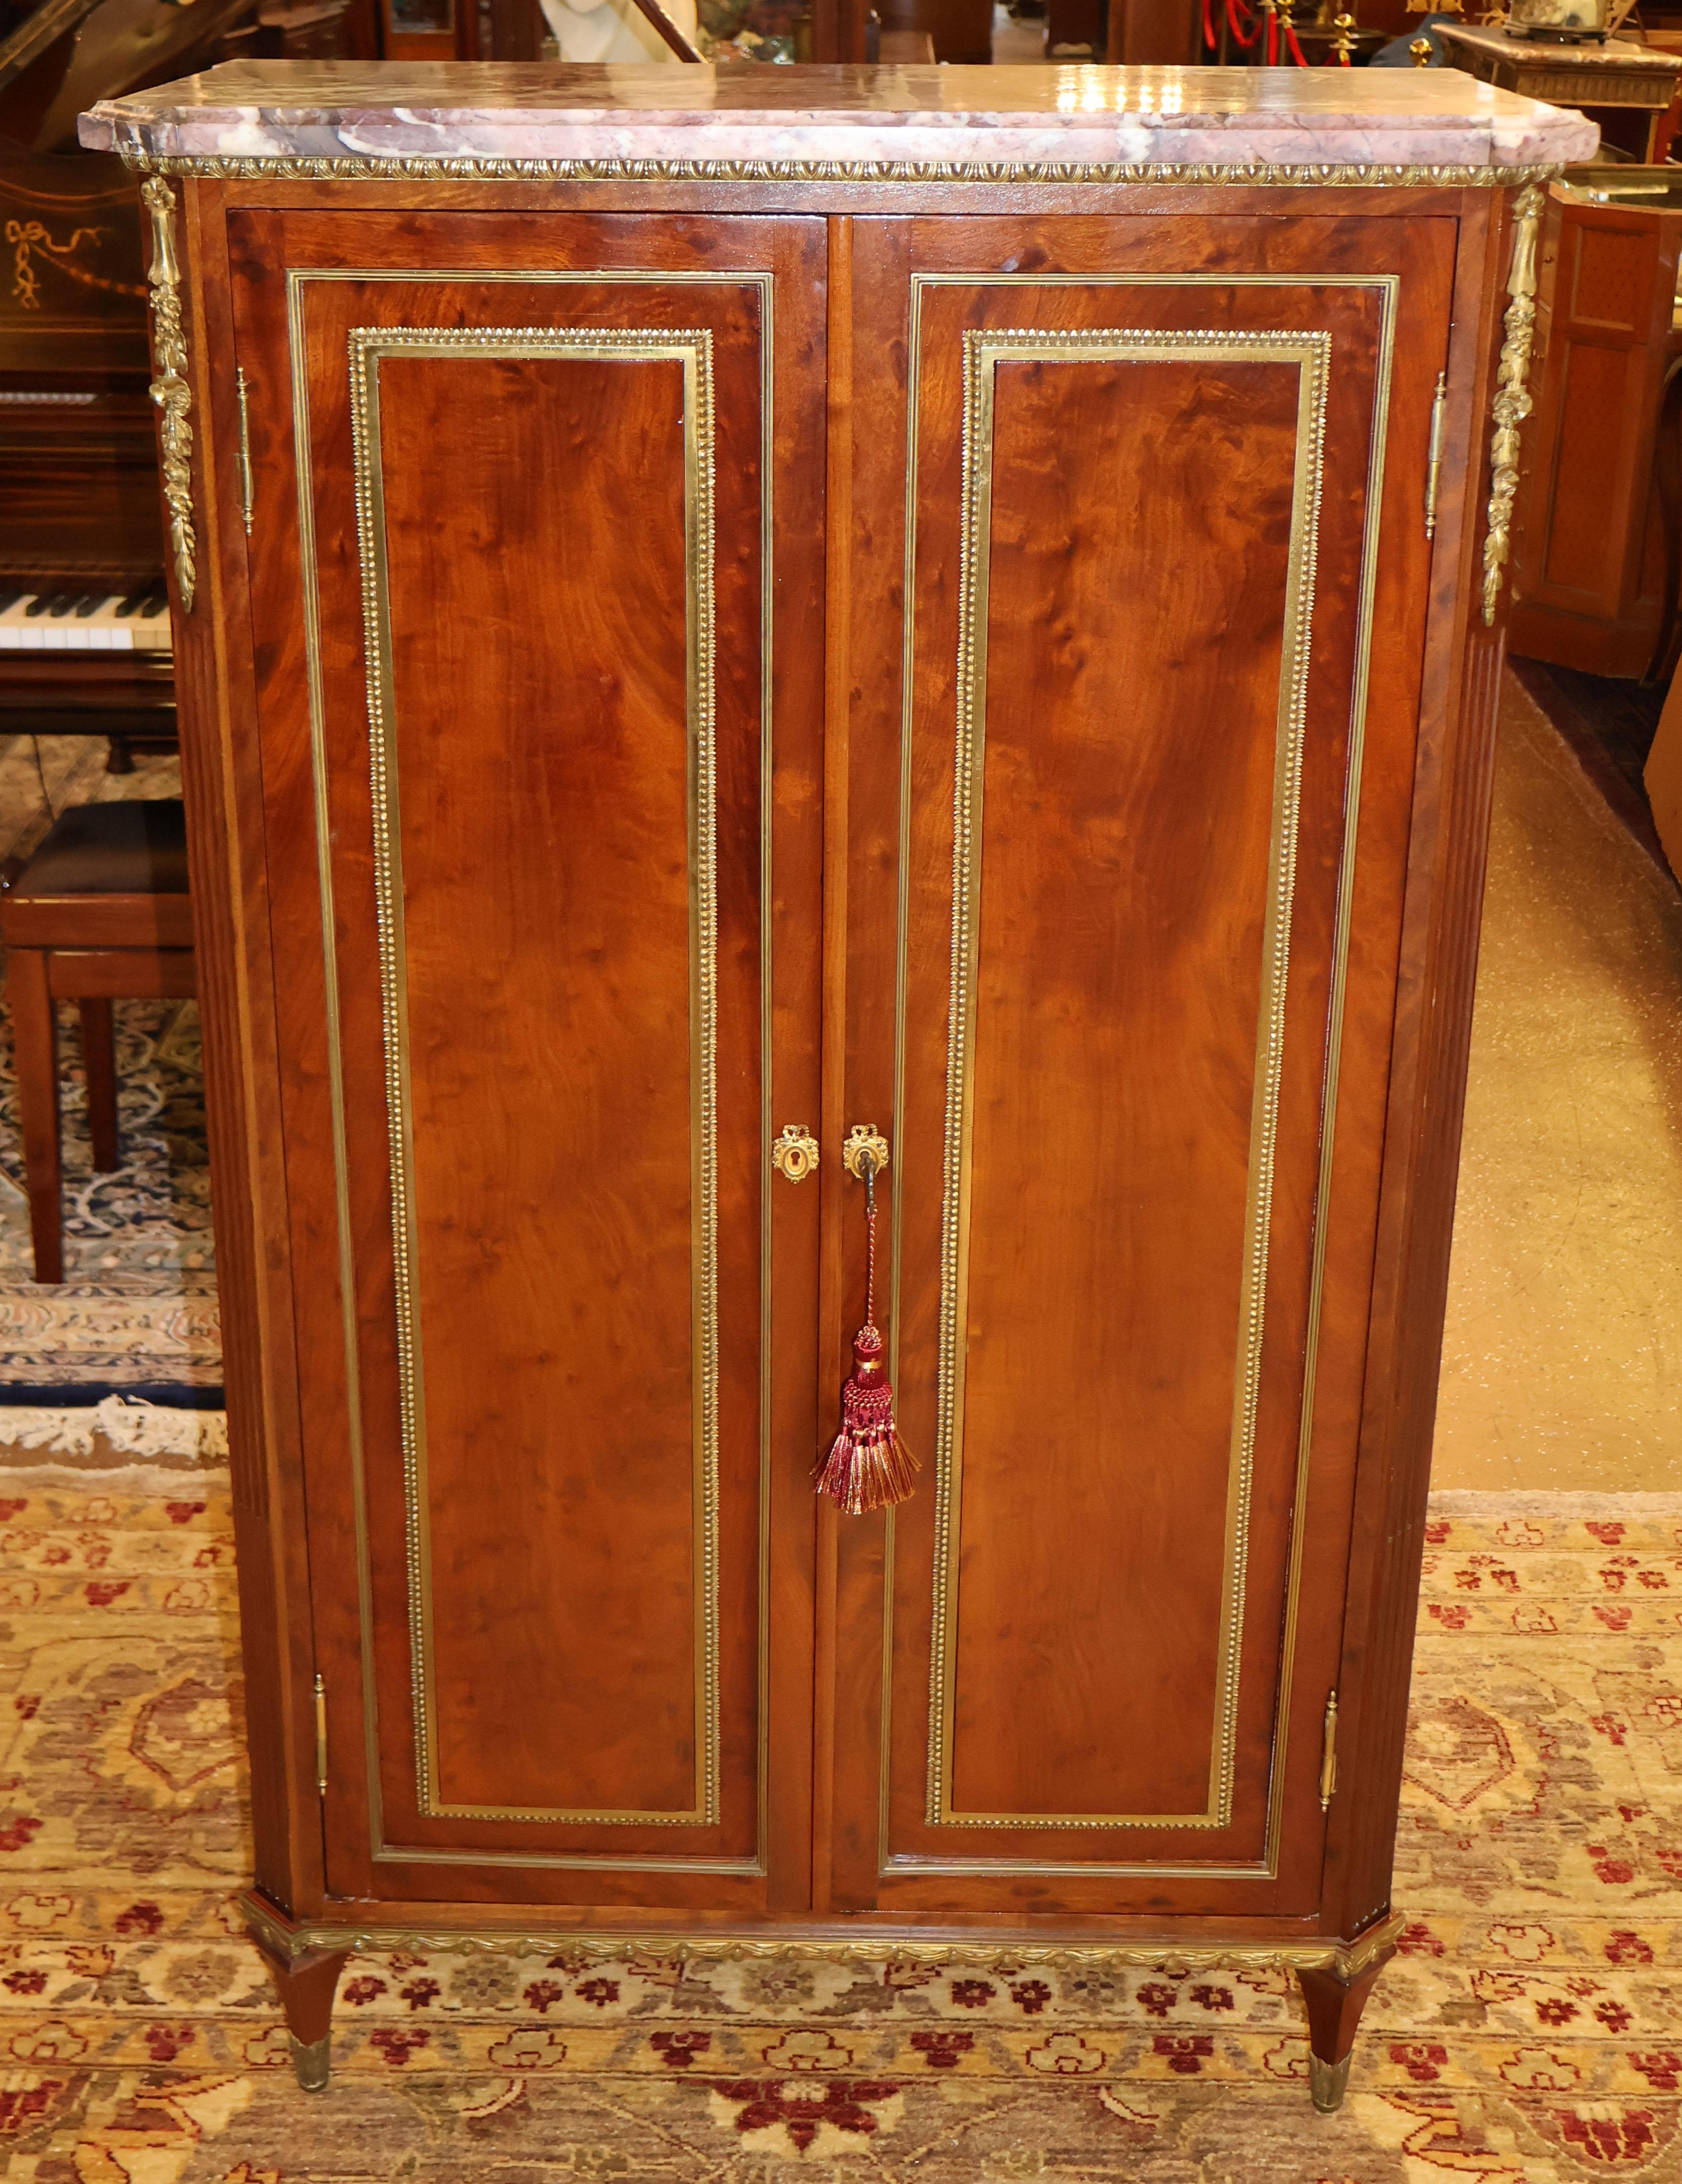 19th Century Marble Top Bronze & Plum Pudding Mahogany Cabinet By  L. Cueunieres

Dimensions : 32.5